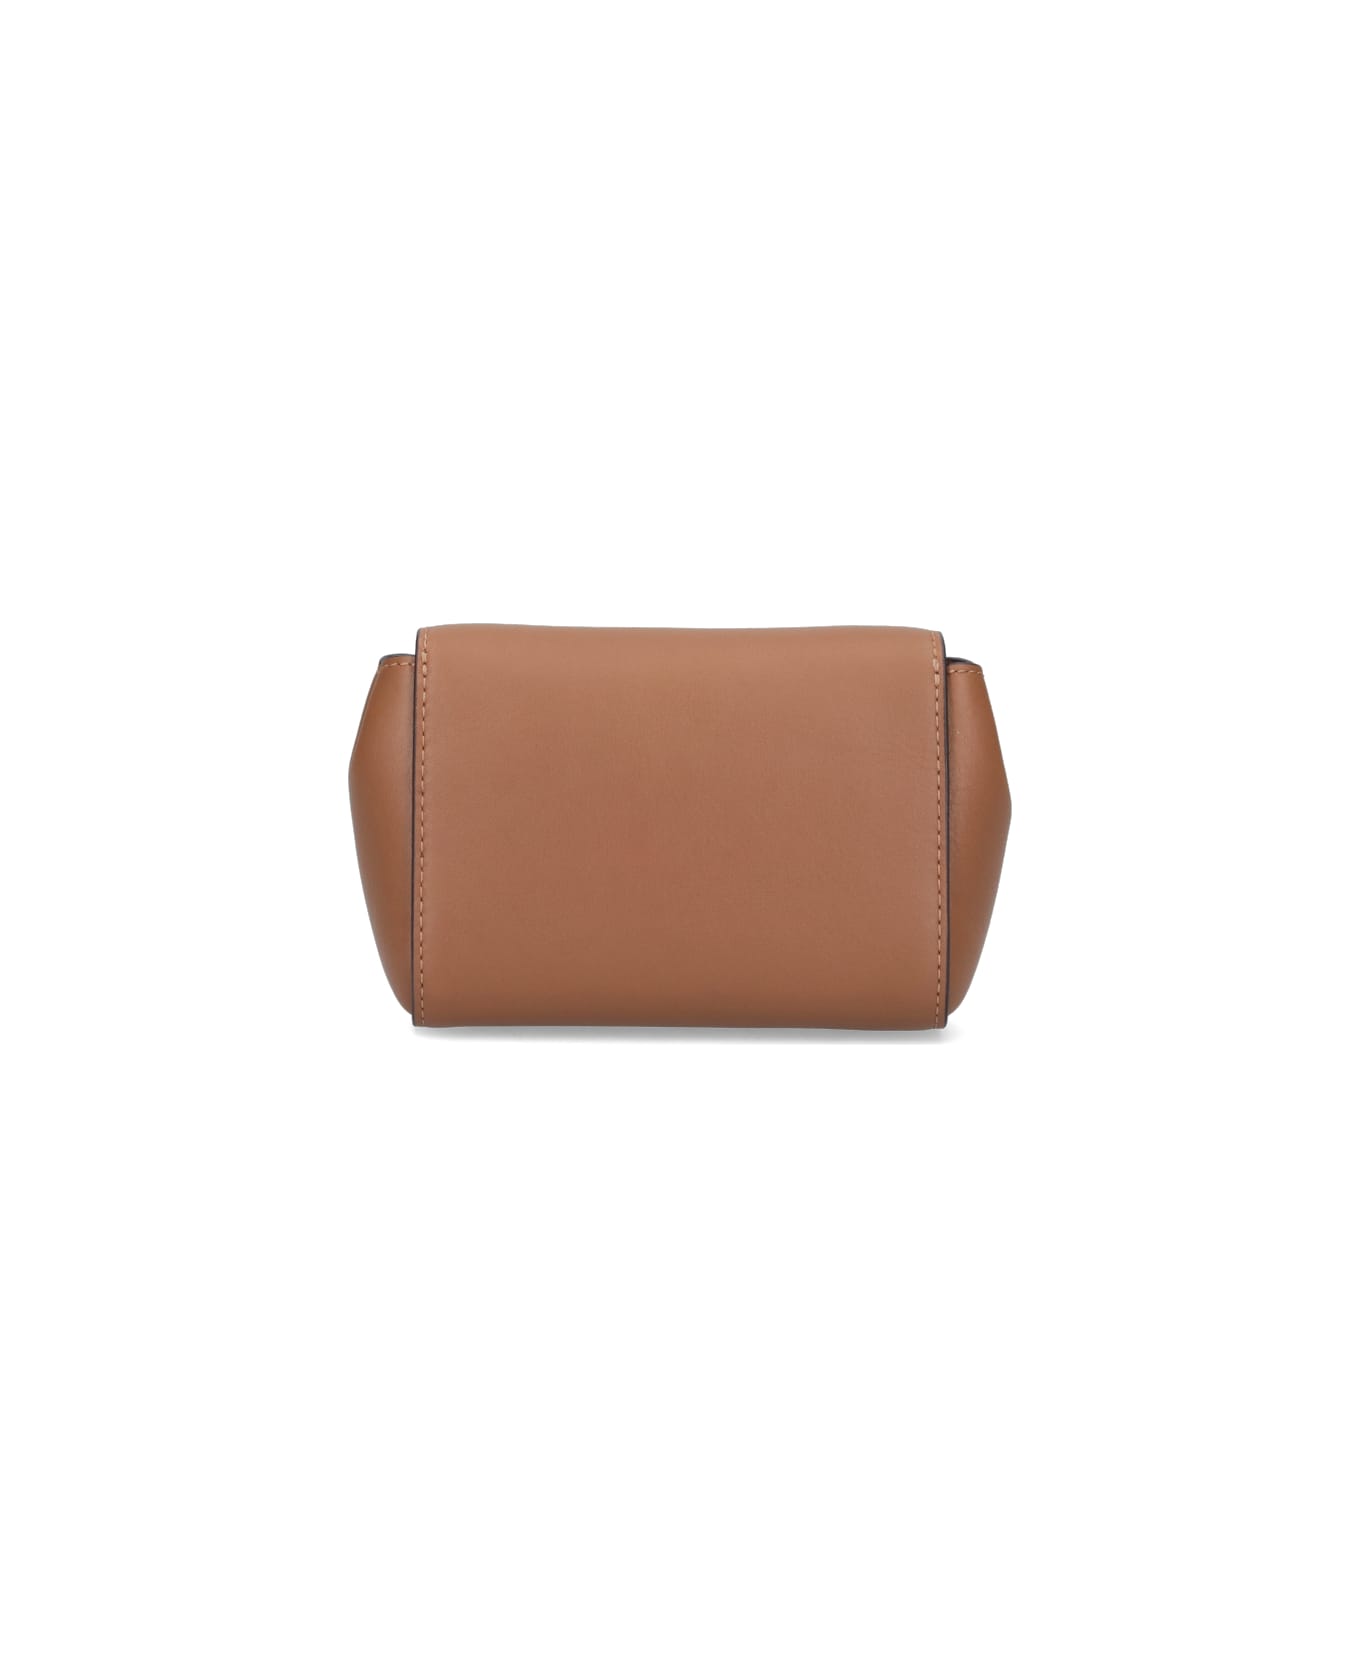 Mulberry "mini Lily" Bag - Brown